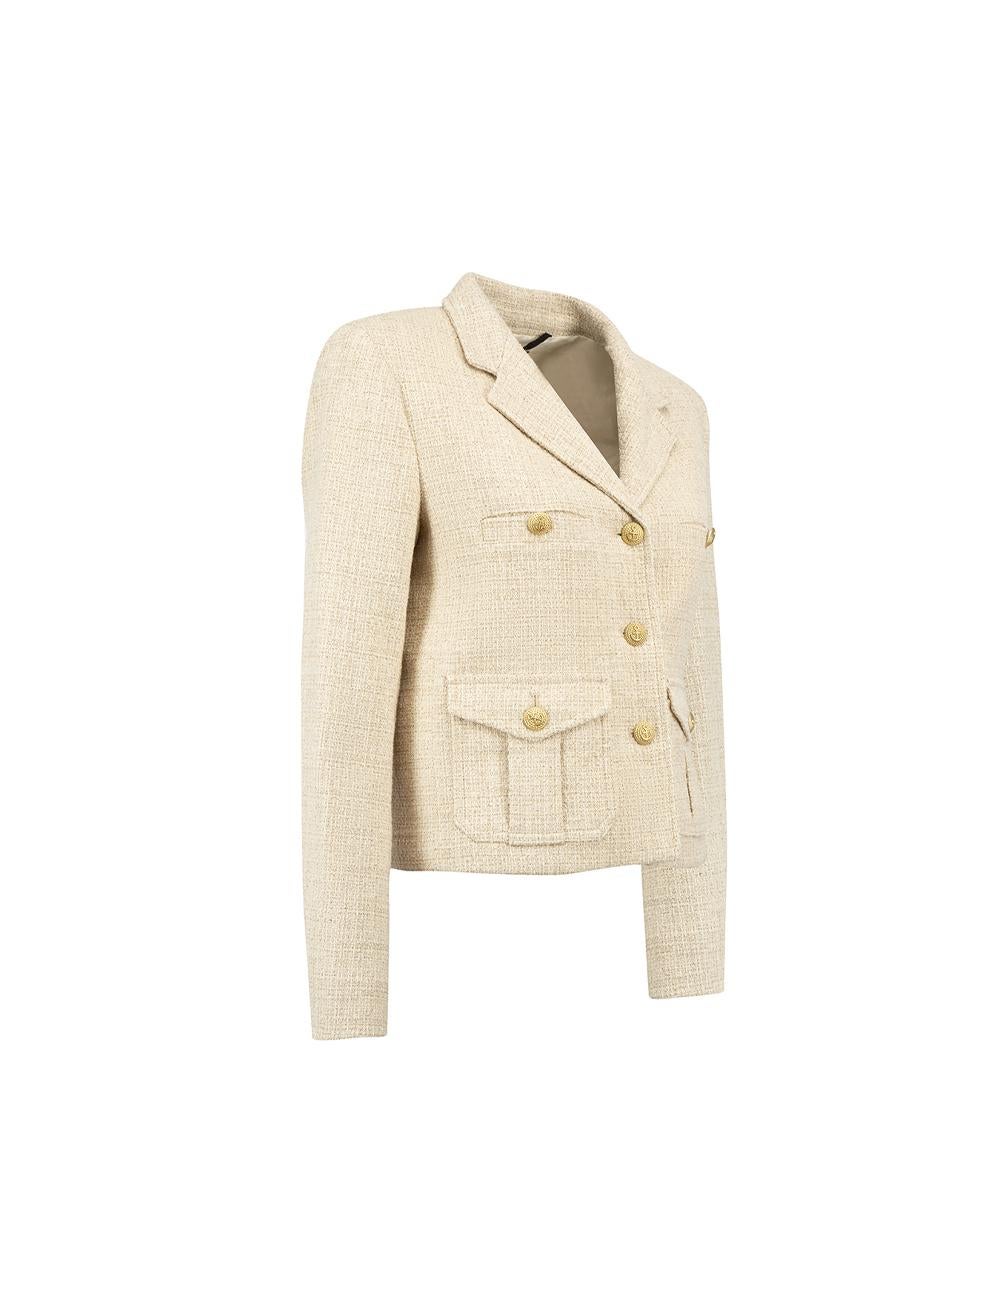 CONDITION is Very good. Hardly any visible wear to jacket is evident on this used Weekend MaxMara designer resale item.



Details


Beige

Tweed

Cropped blazer jacket

Button up fastening

2x Patch pockets

2x Slip pockets







Composition

65%